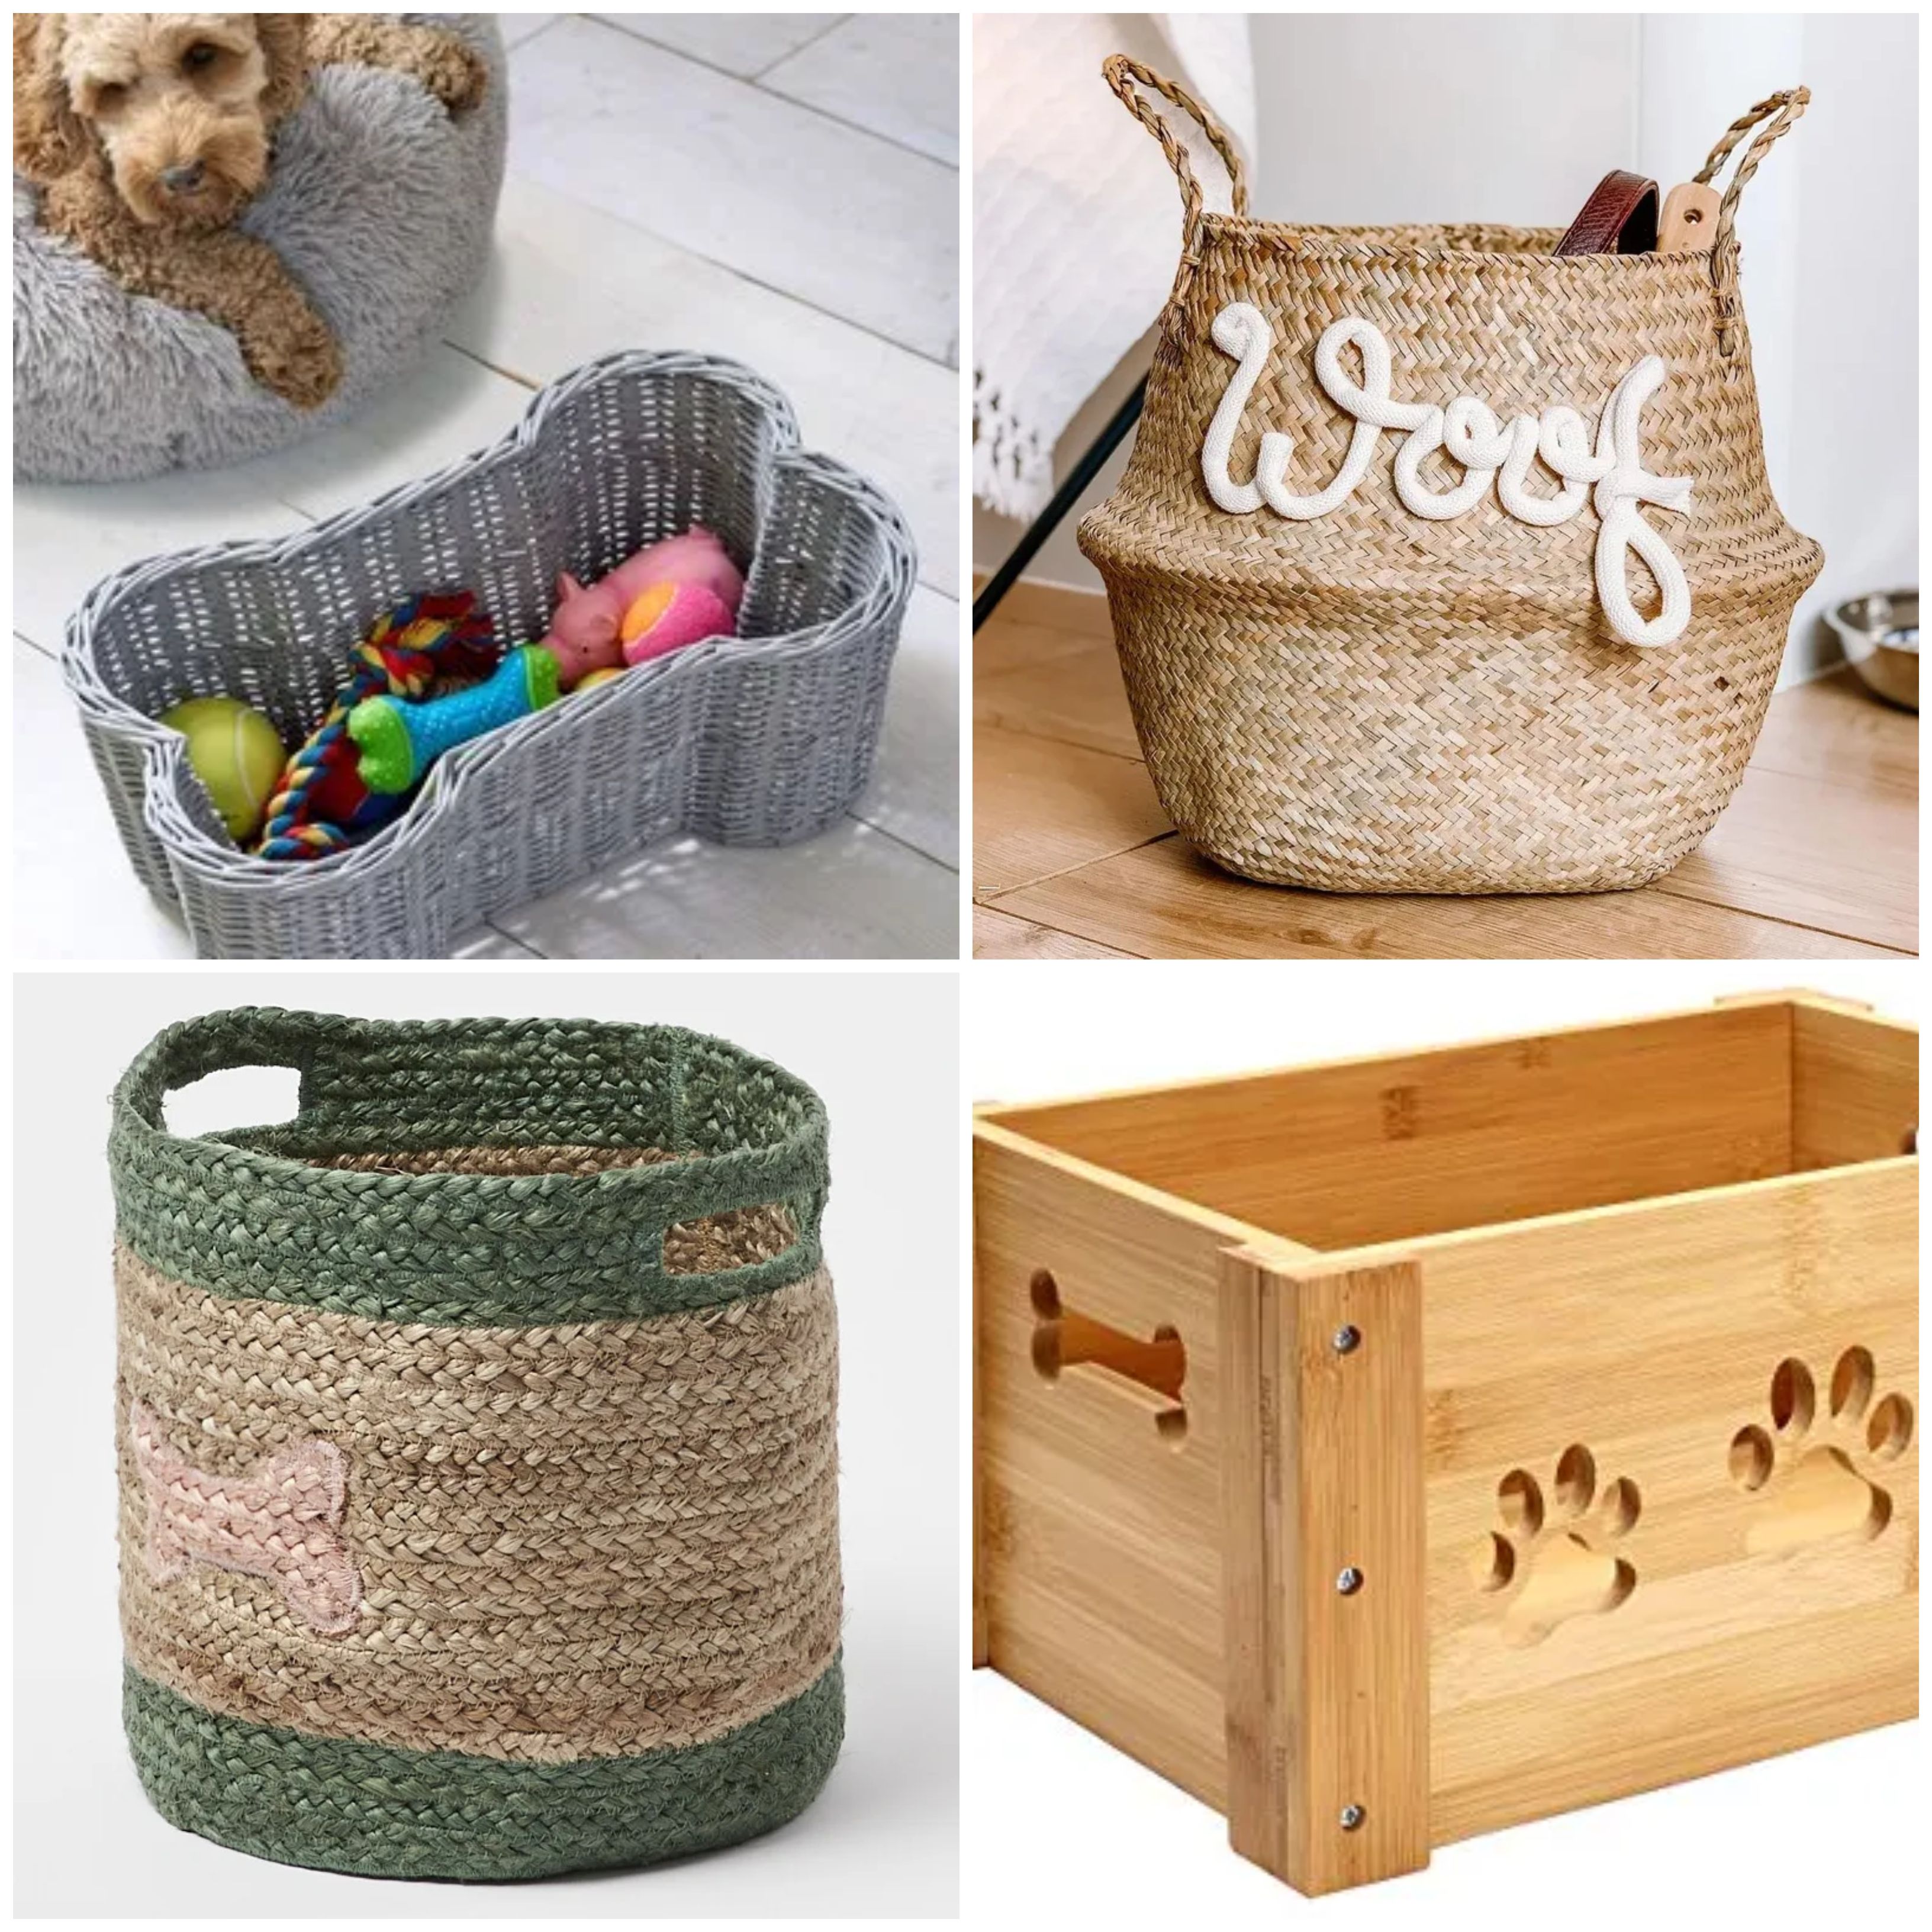 Brown/Beige, 3 Pack, Large, Medium and Small HEHEYQJ Storage bins with Handles Storage Baskets Box for Cupboards,Bathroom,Clothes,Nursery,Storage Organizer and Gift Baskets,Pet toy Storage Collection 